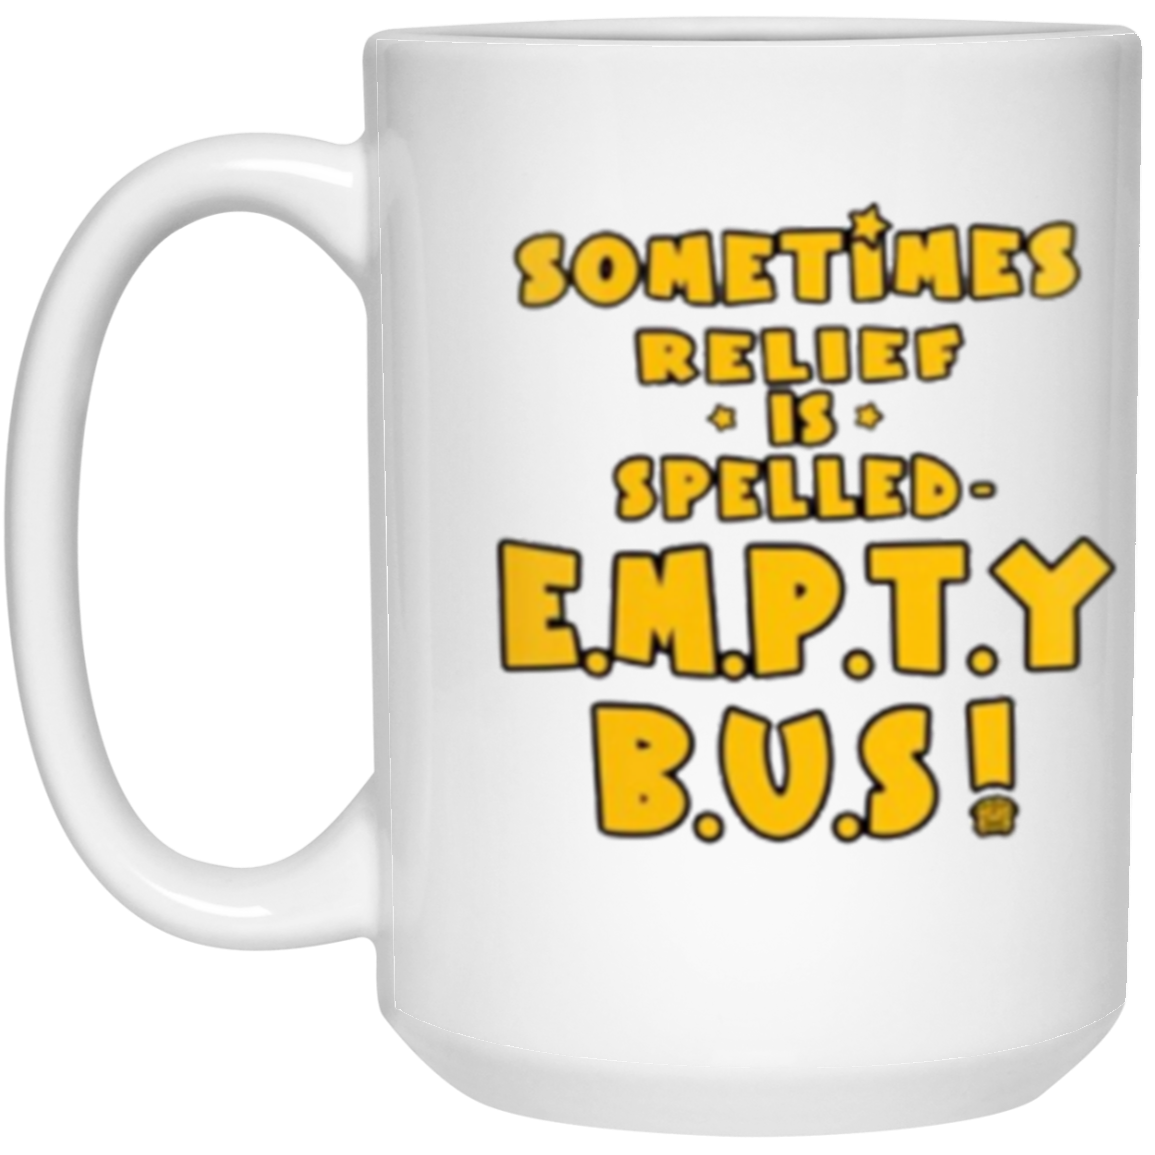 Sometimes Relief is spelled Empty Bus! Coffee Mug